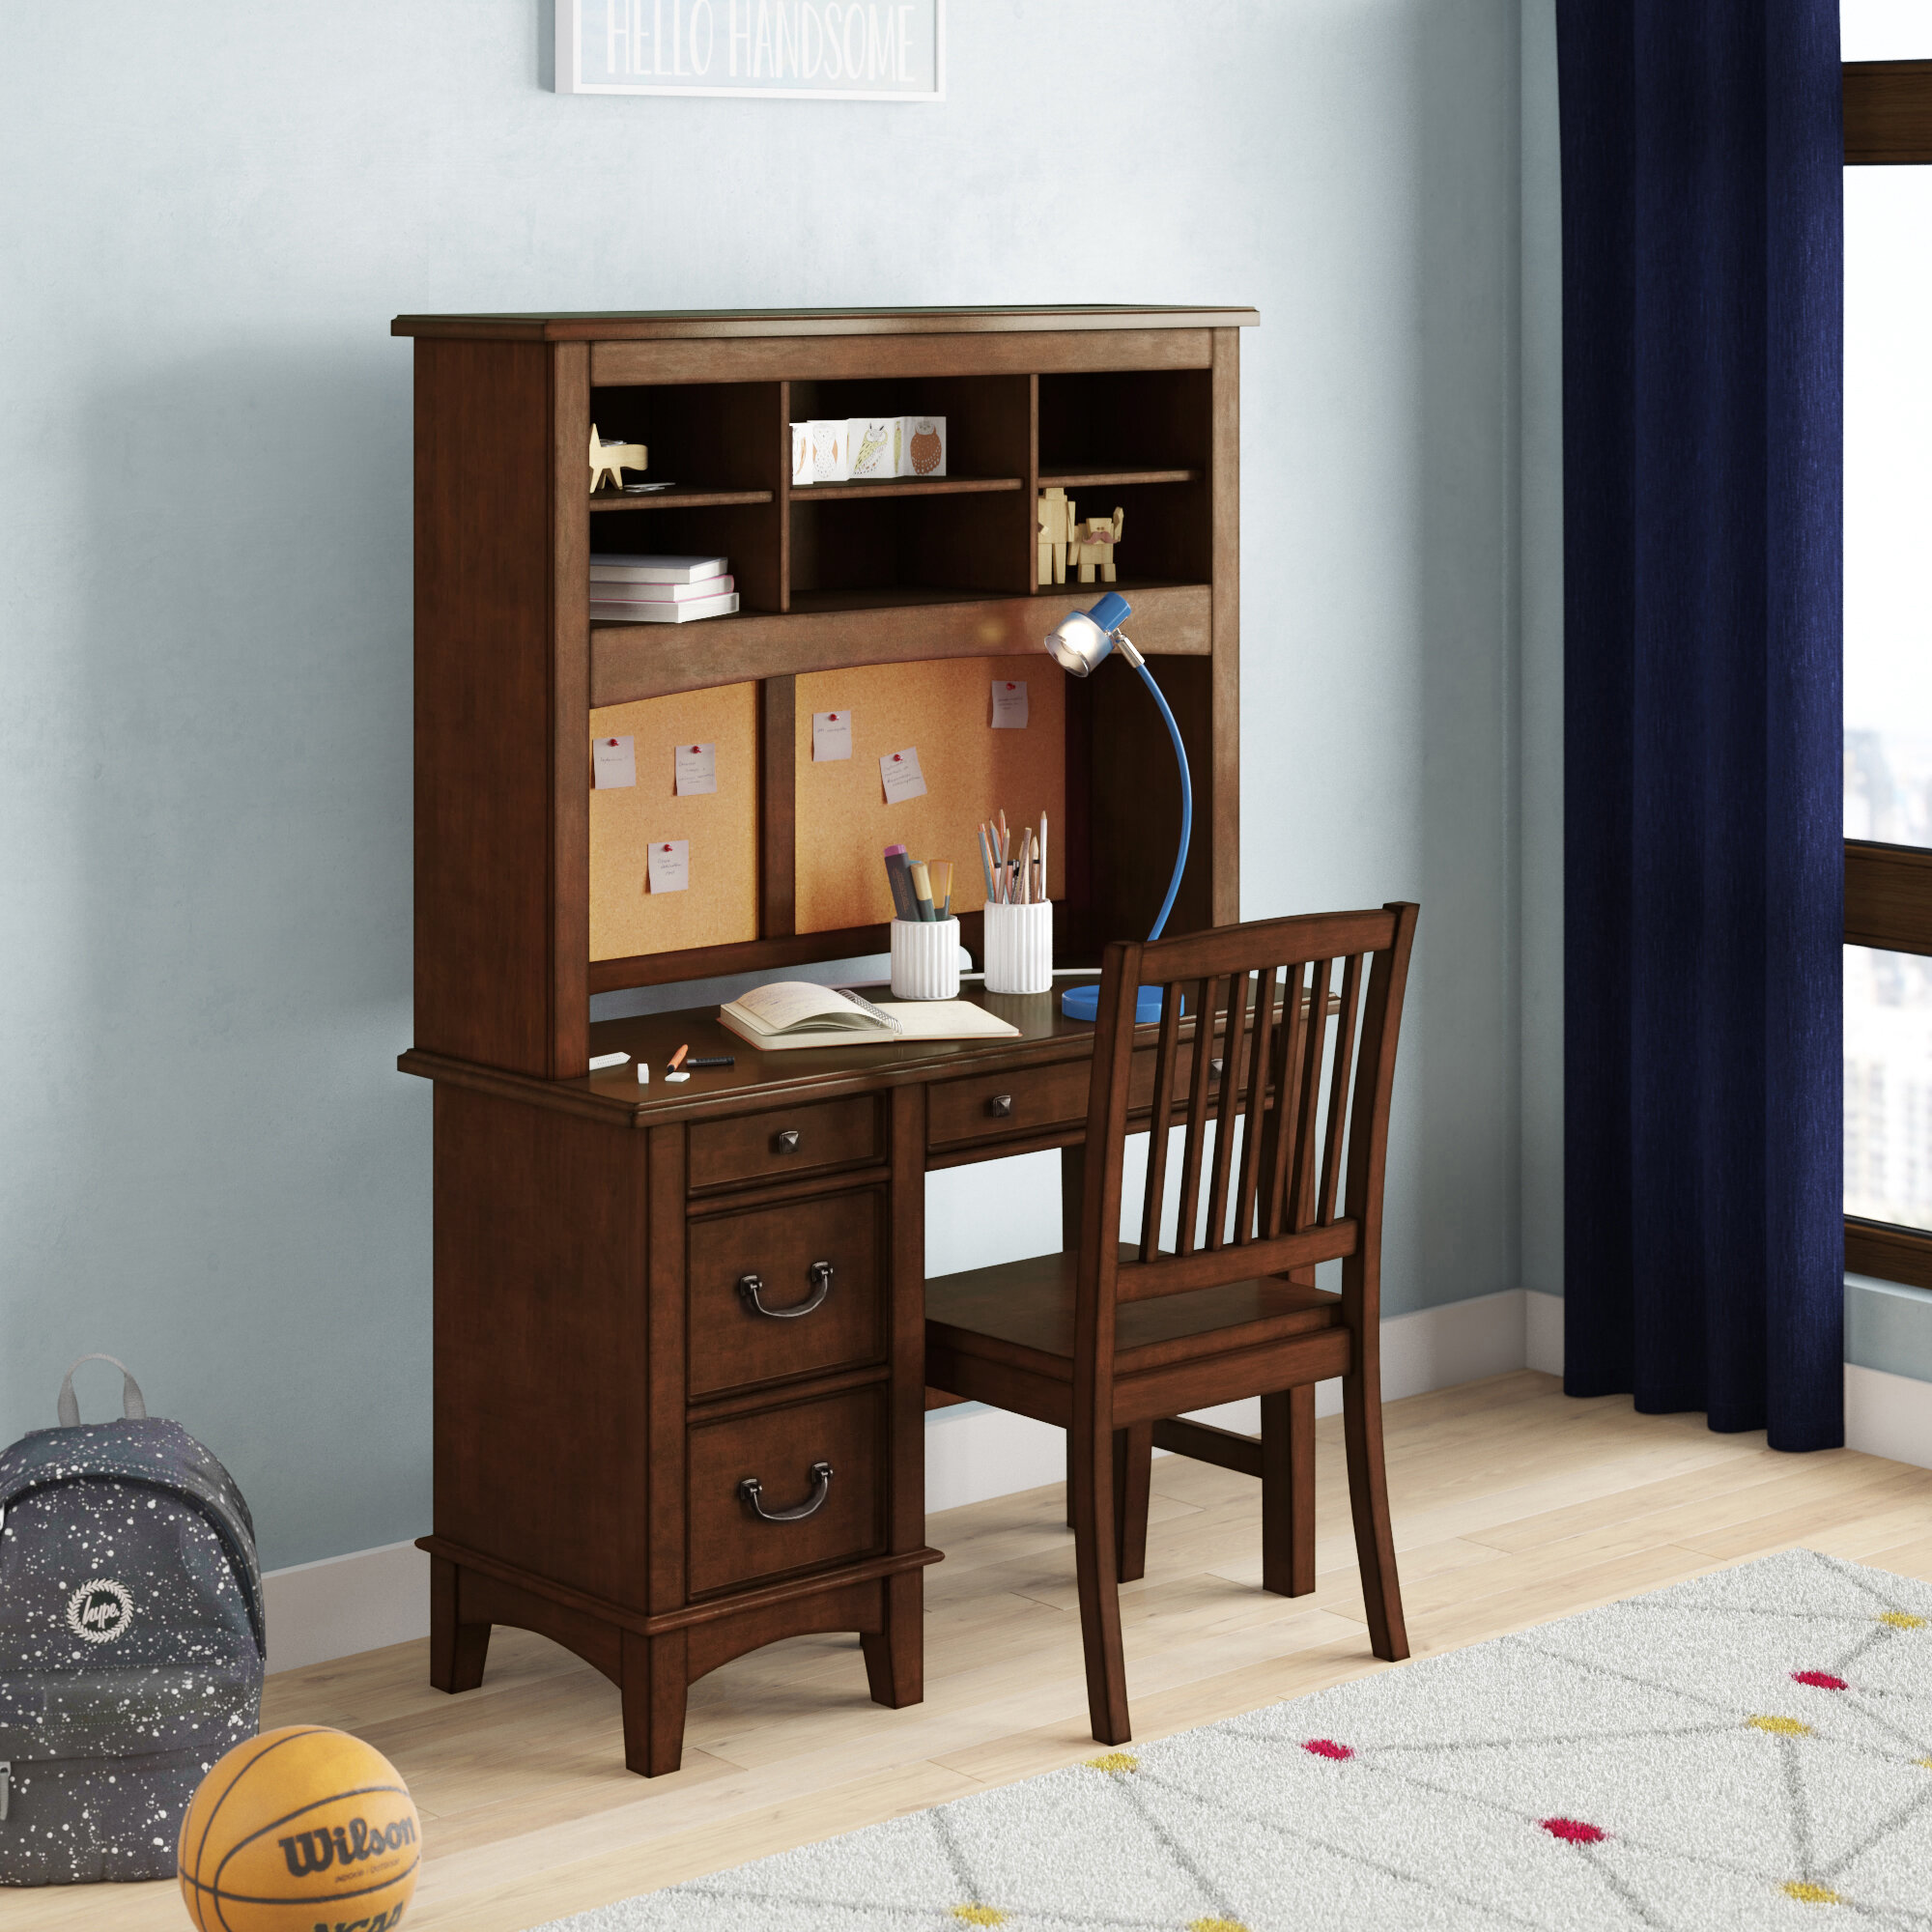 children's study table and cupboard set